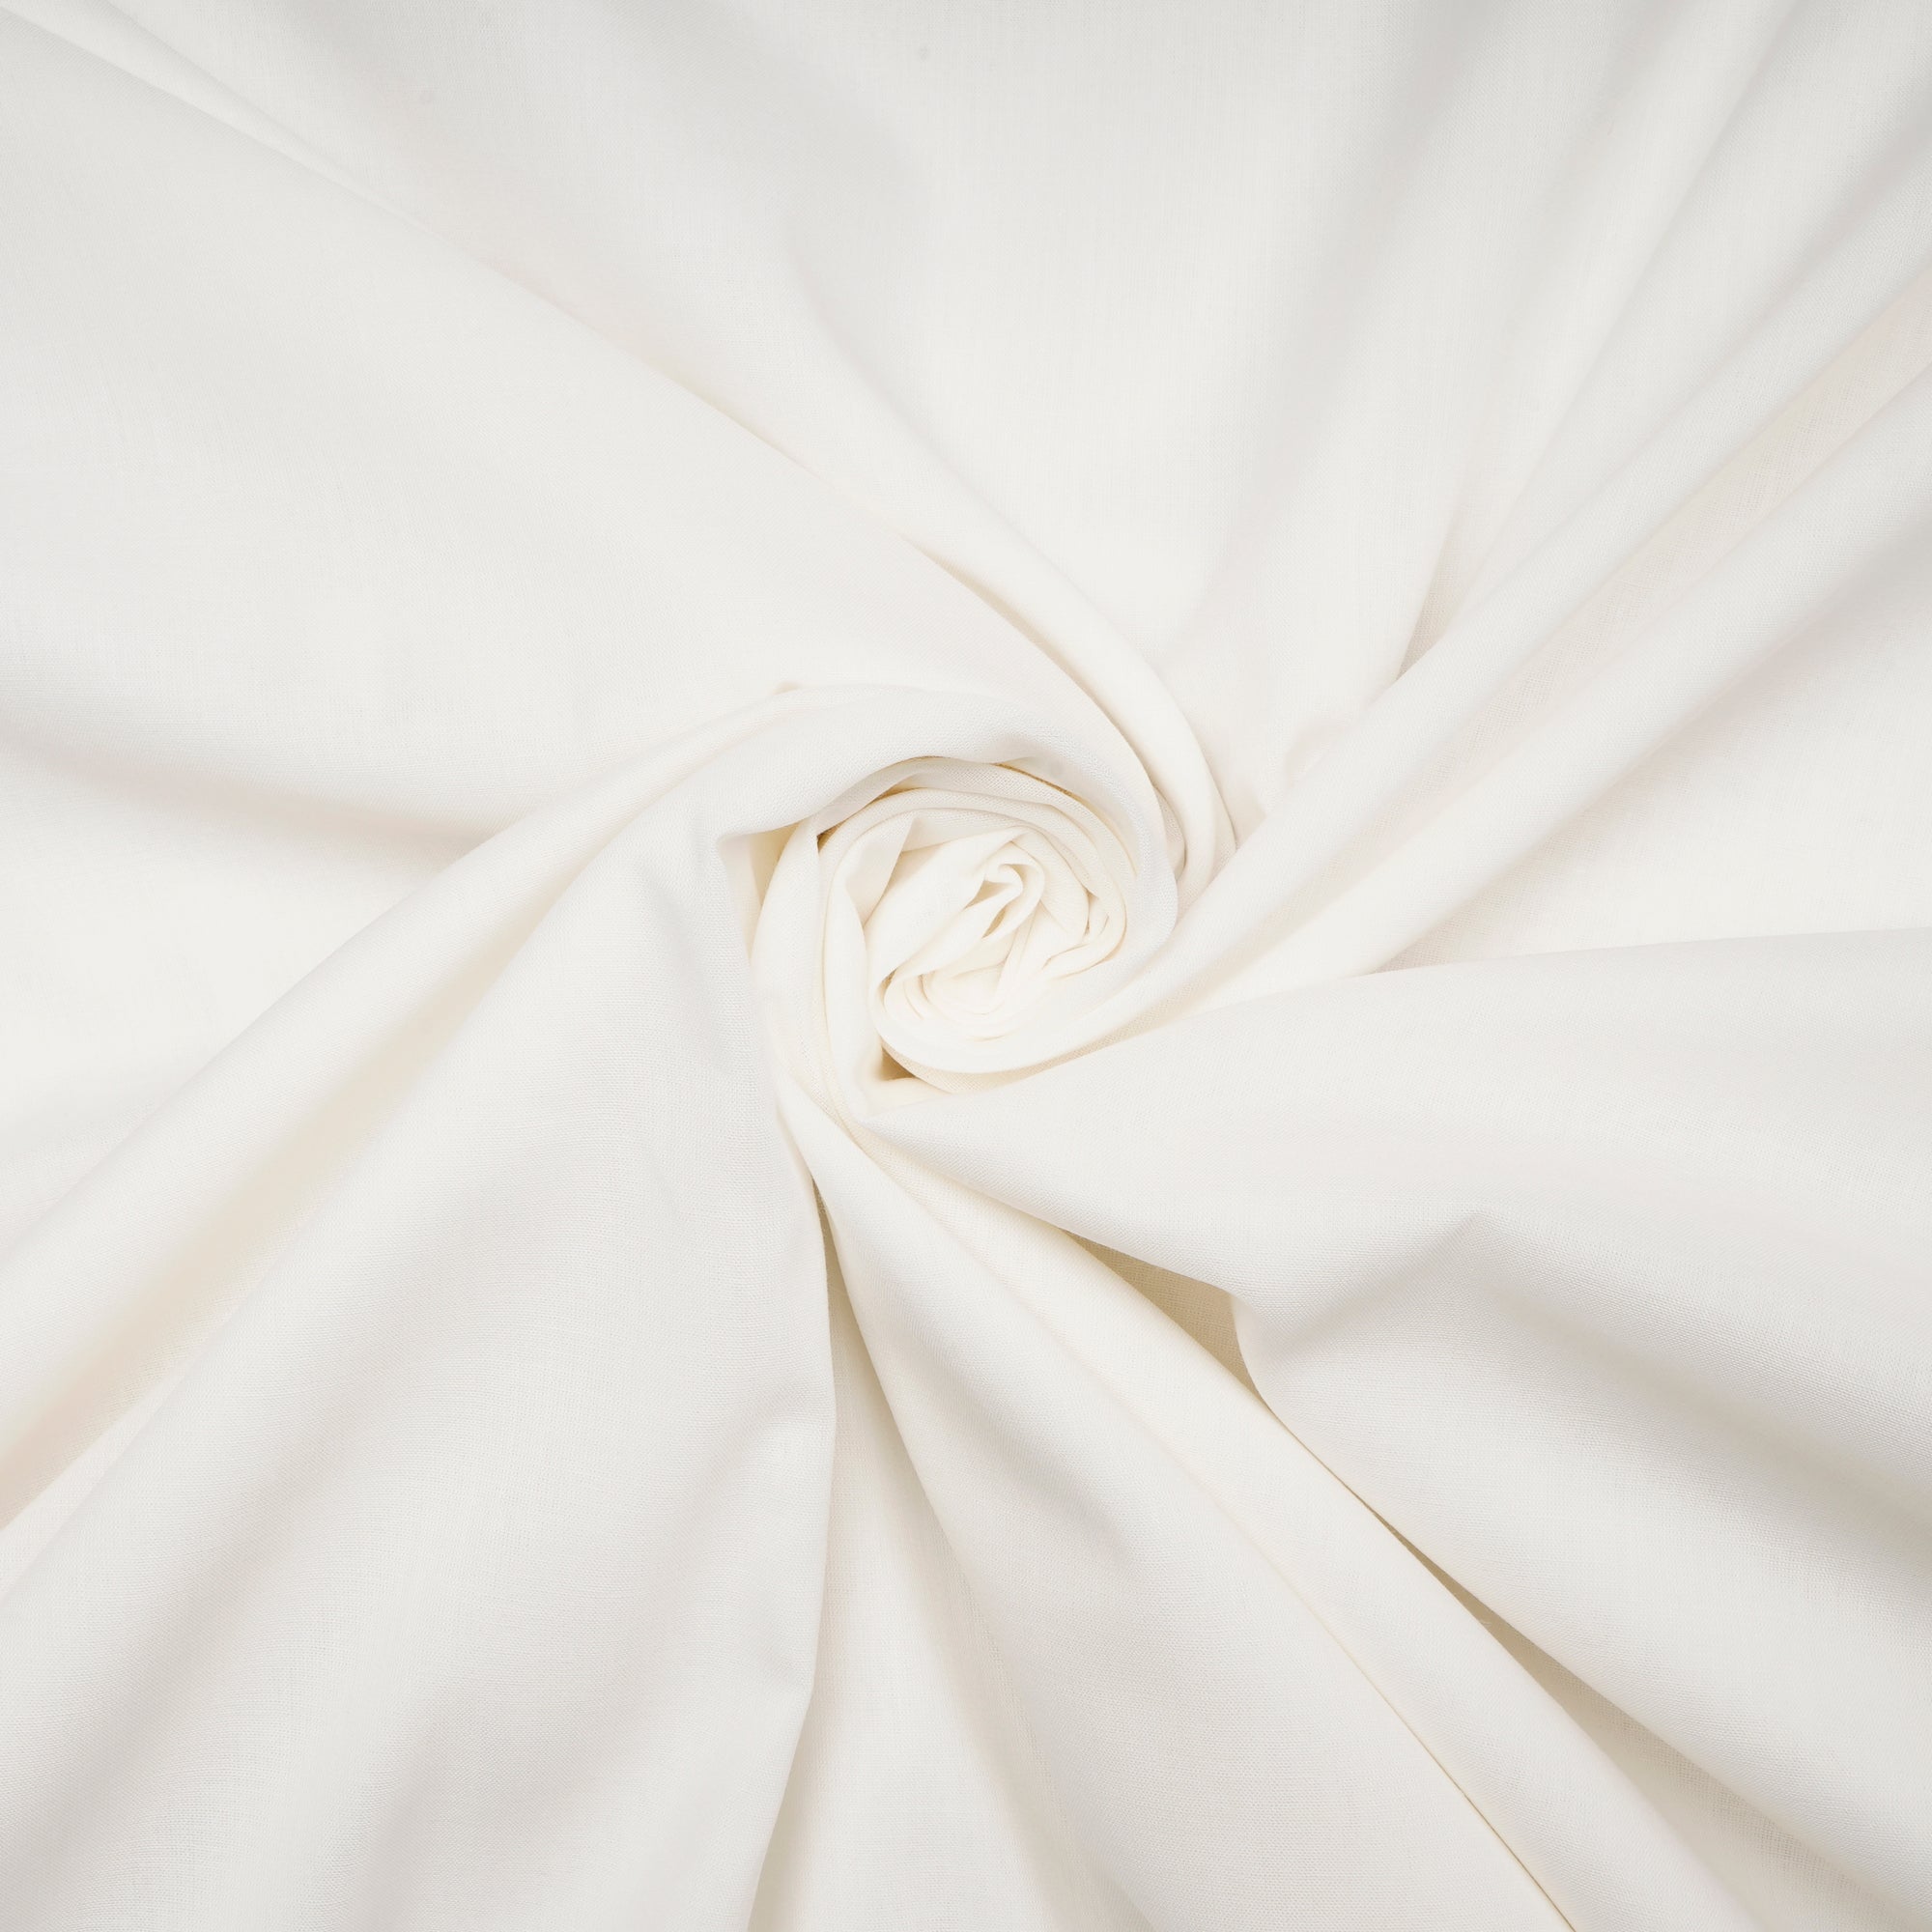 White Plain Mill Made High Twist Poly Cotton Fabric